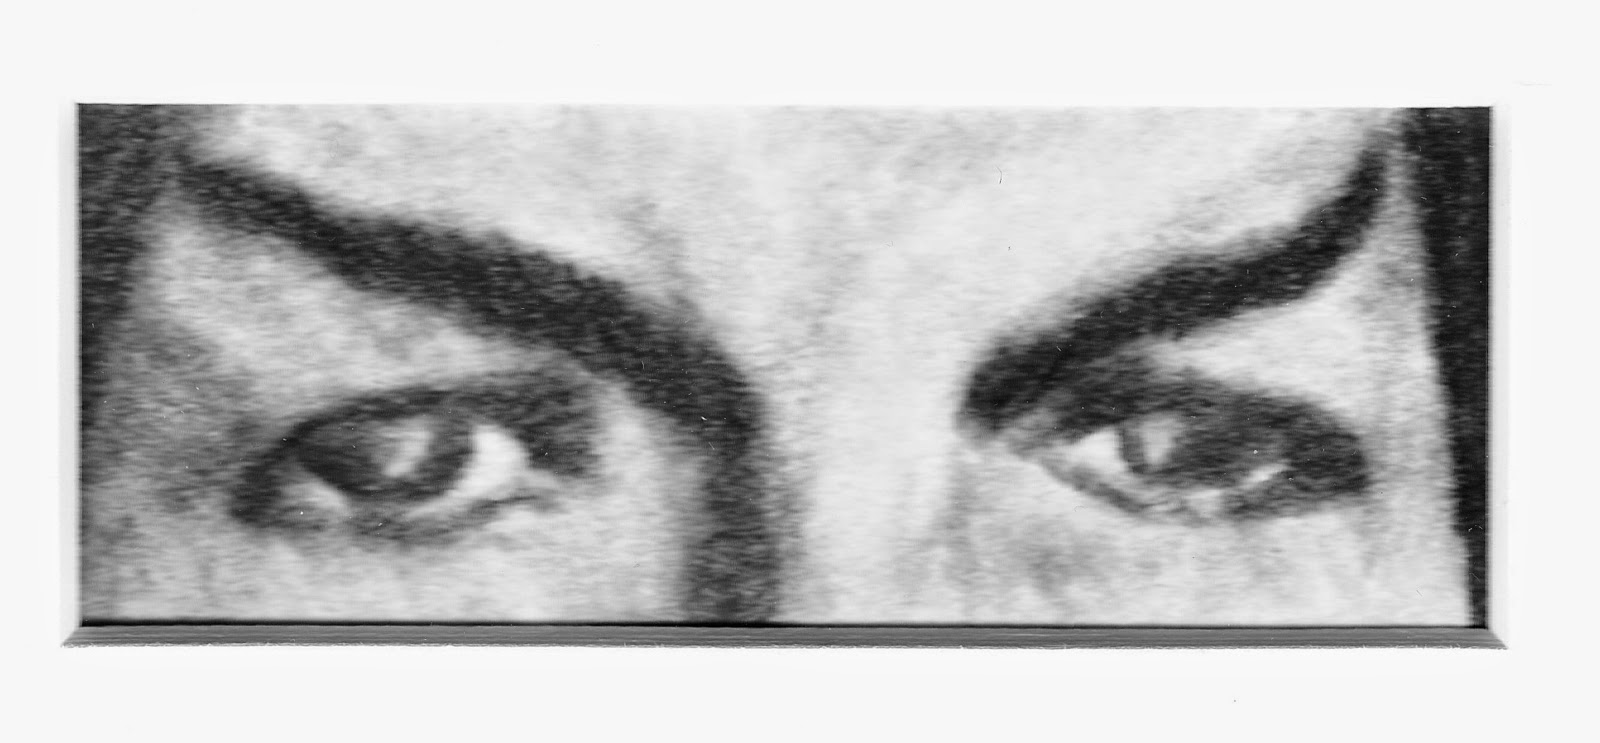 Eyes of Mister Spock by F. Lennox Campello